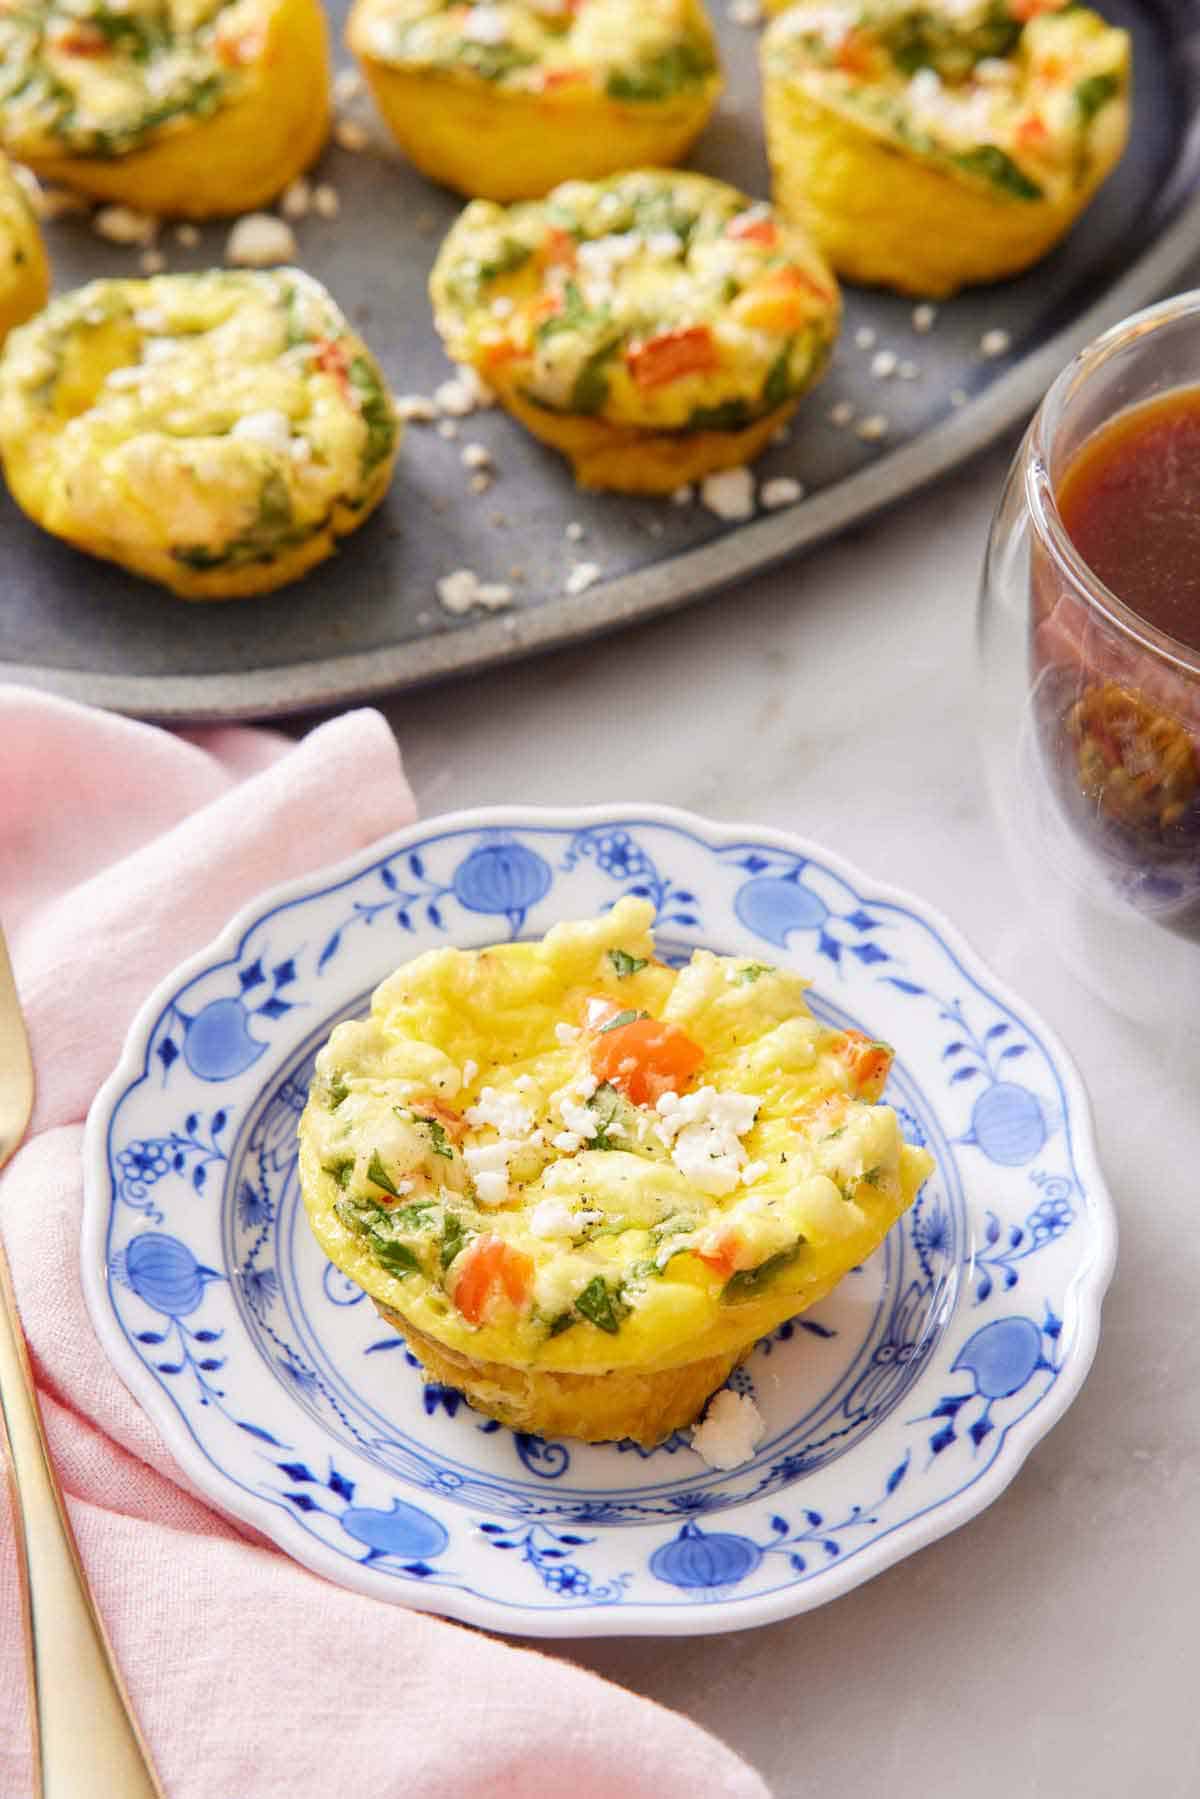 A plate with an egg muffin topped with crumbled feta cheese. A platter with more egg muffins and a coffee in the background.